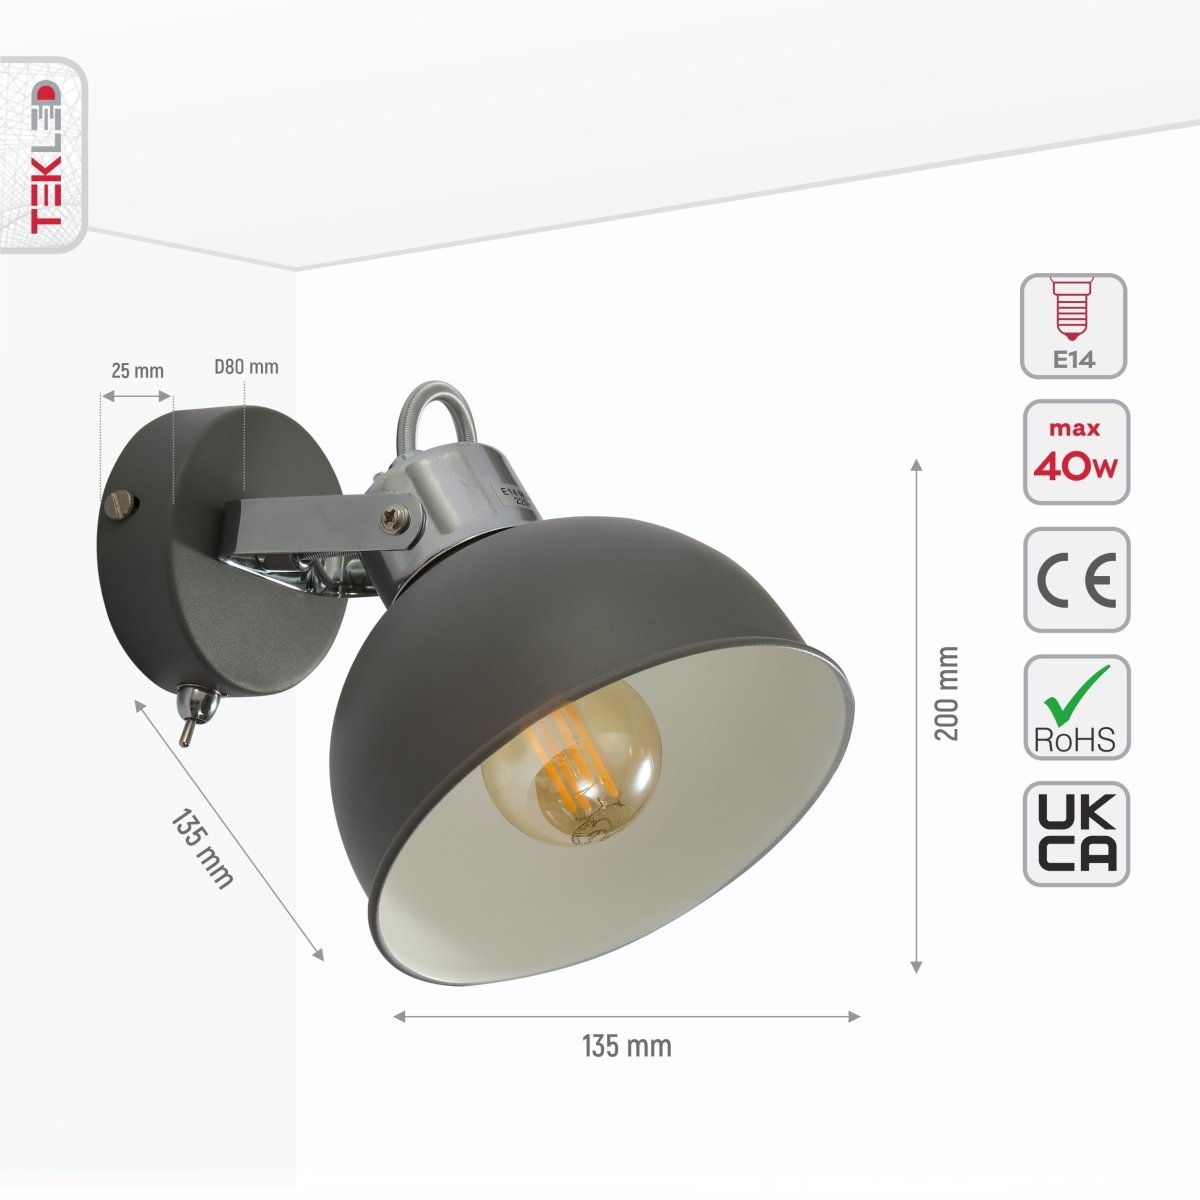 Size and specs of Grey Dome Adjustable Wall and Ceiling Light with Switch on the Rose E14 | TEKLED 151-19800